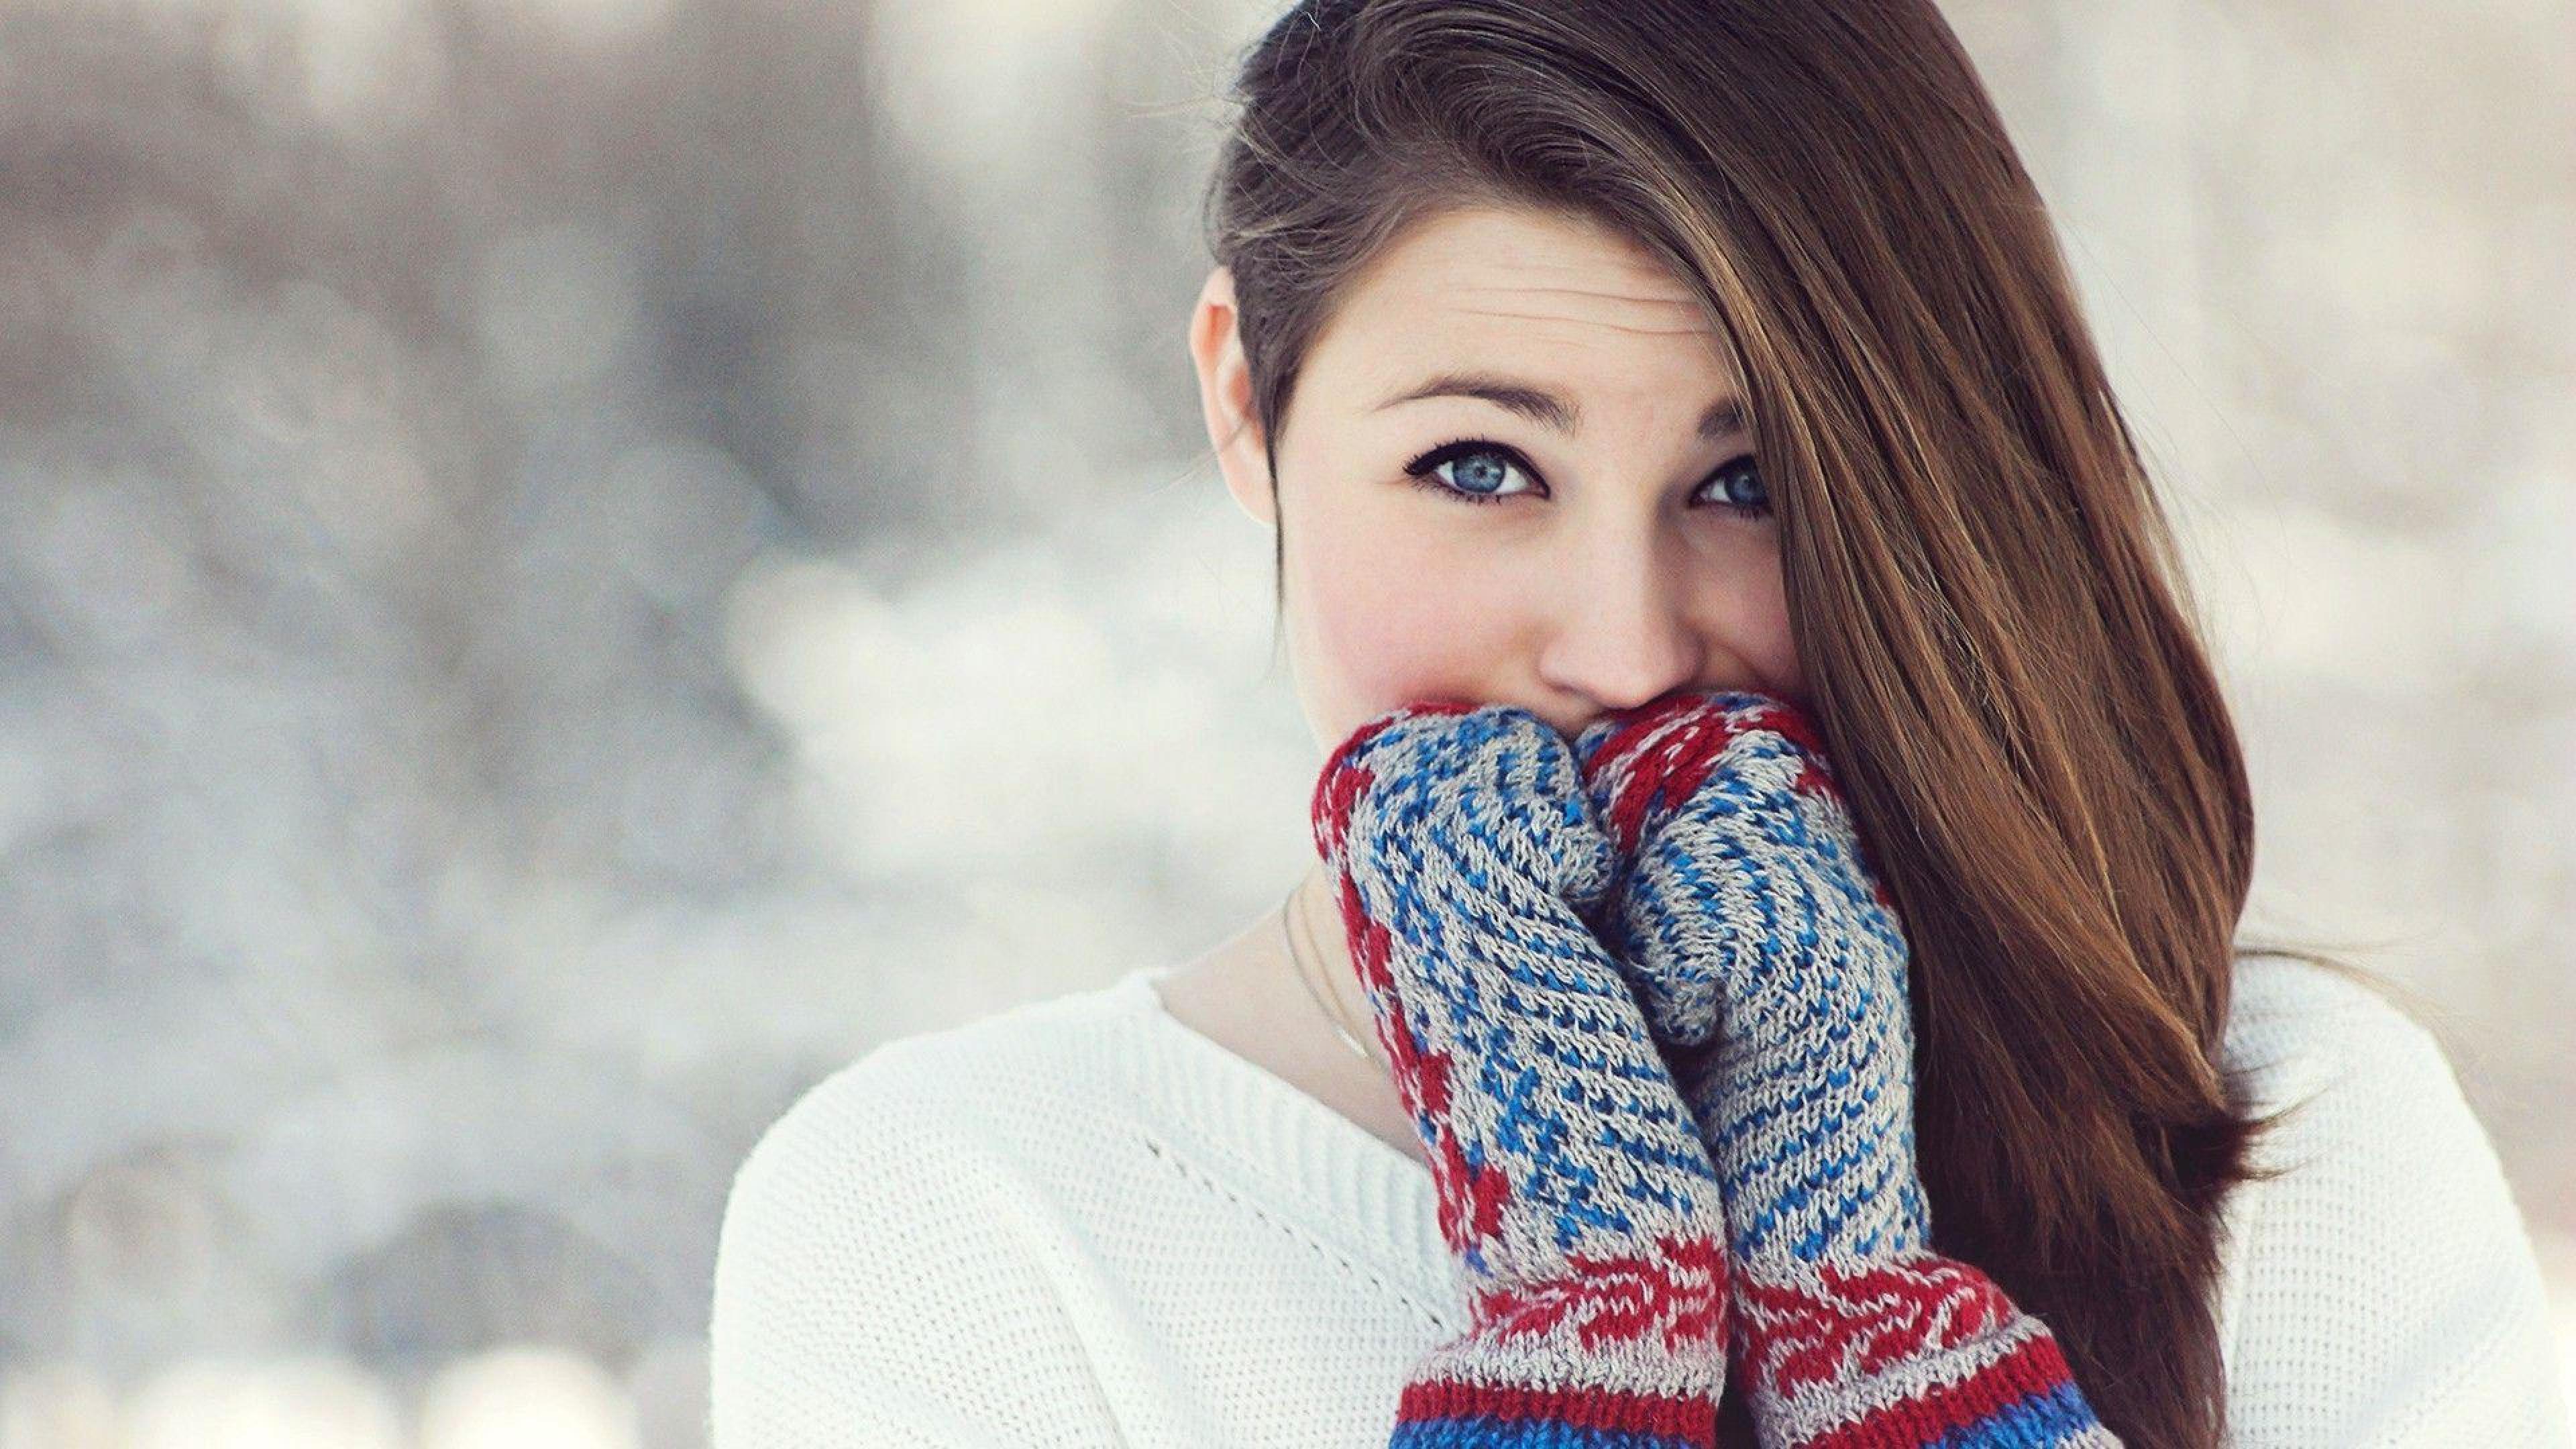 3840 x 2160 · jpeg - Winter Girl Wallpapers Images Photos Pictures Backgrounds